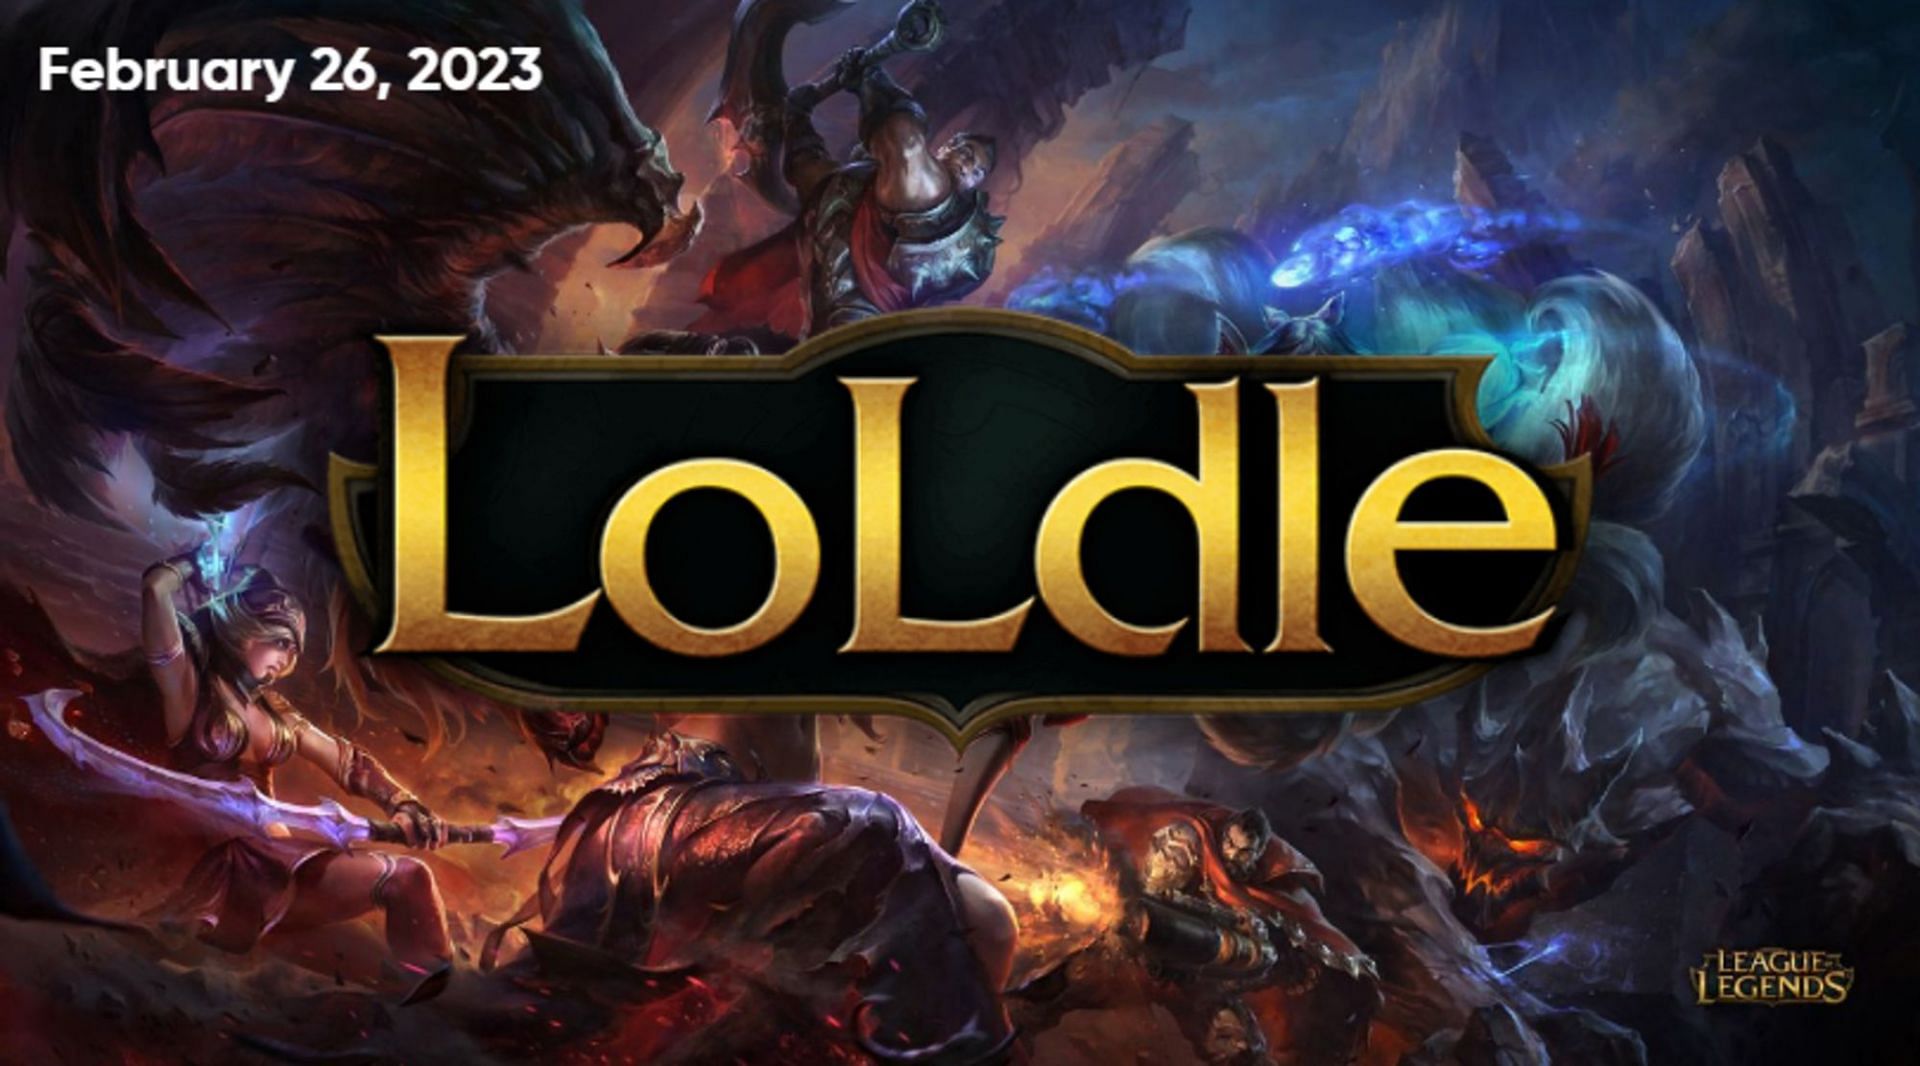 More prey, more prizes: League of Legends LoLdle answers 506 (Saturday,  November 25, 2023)